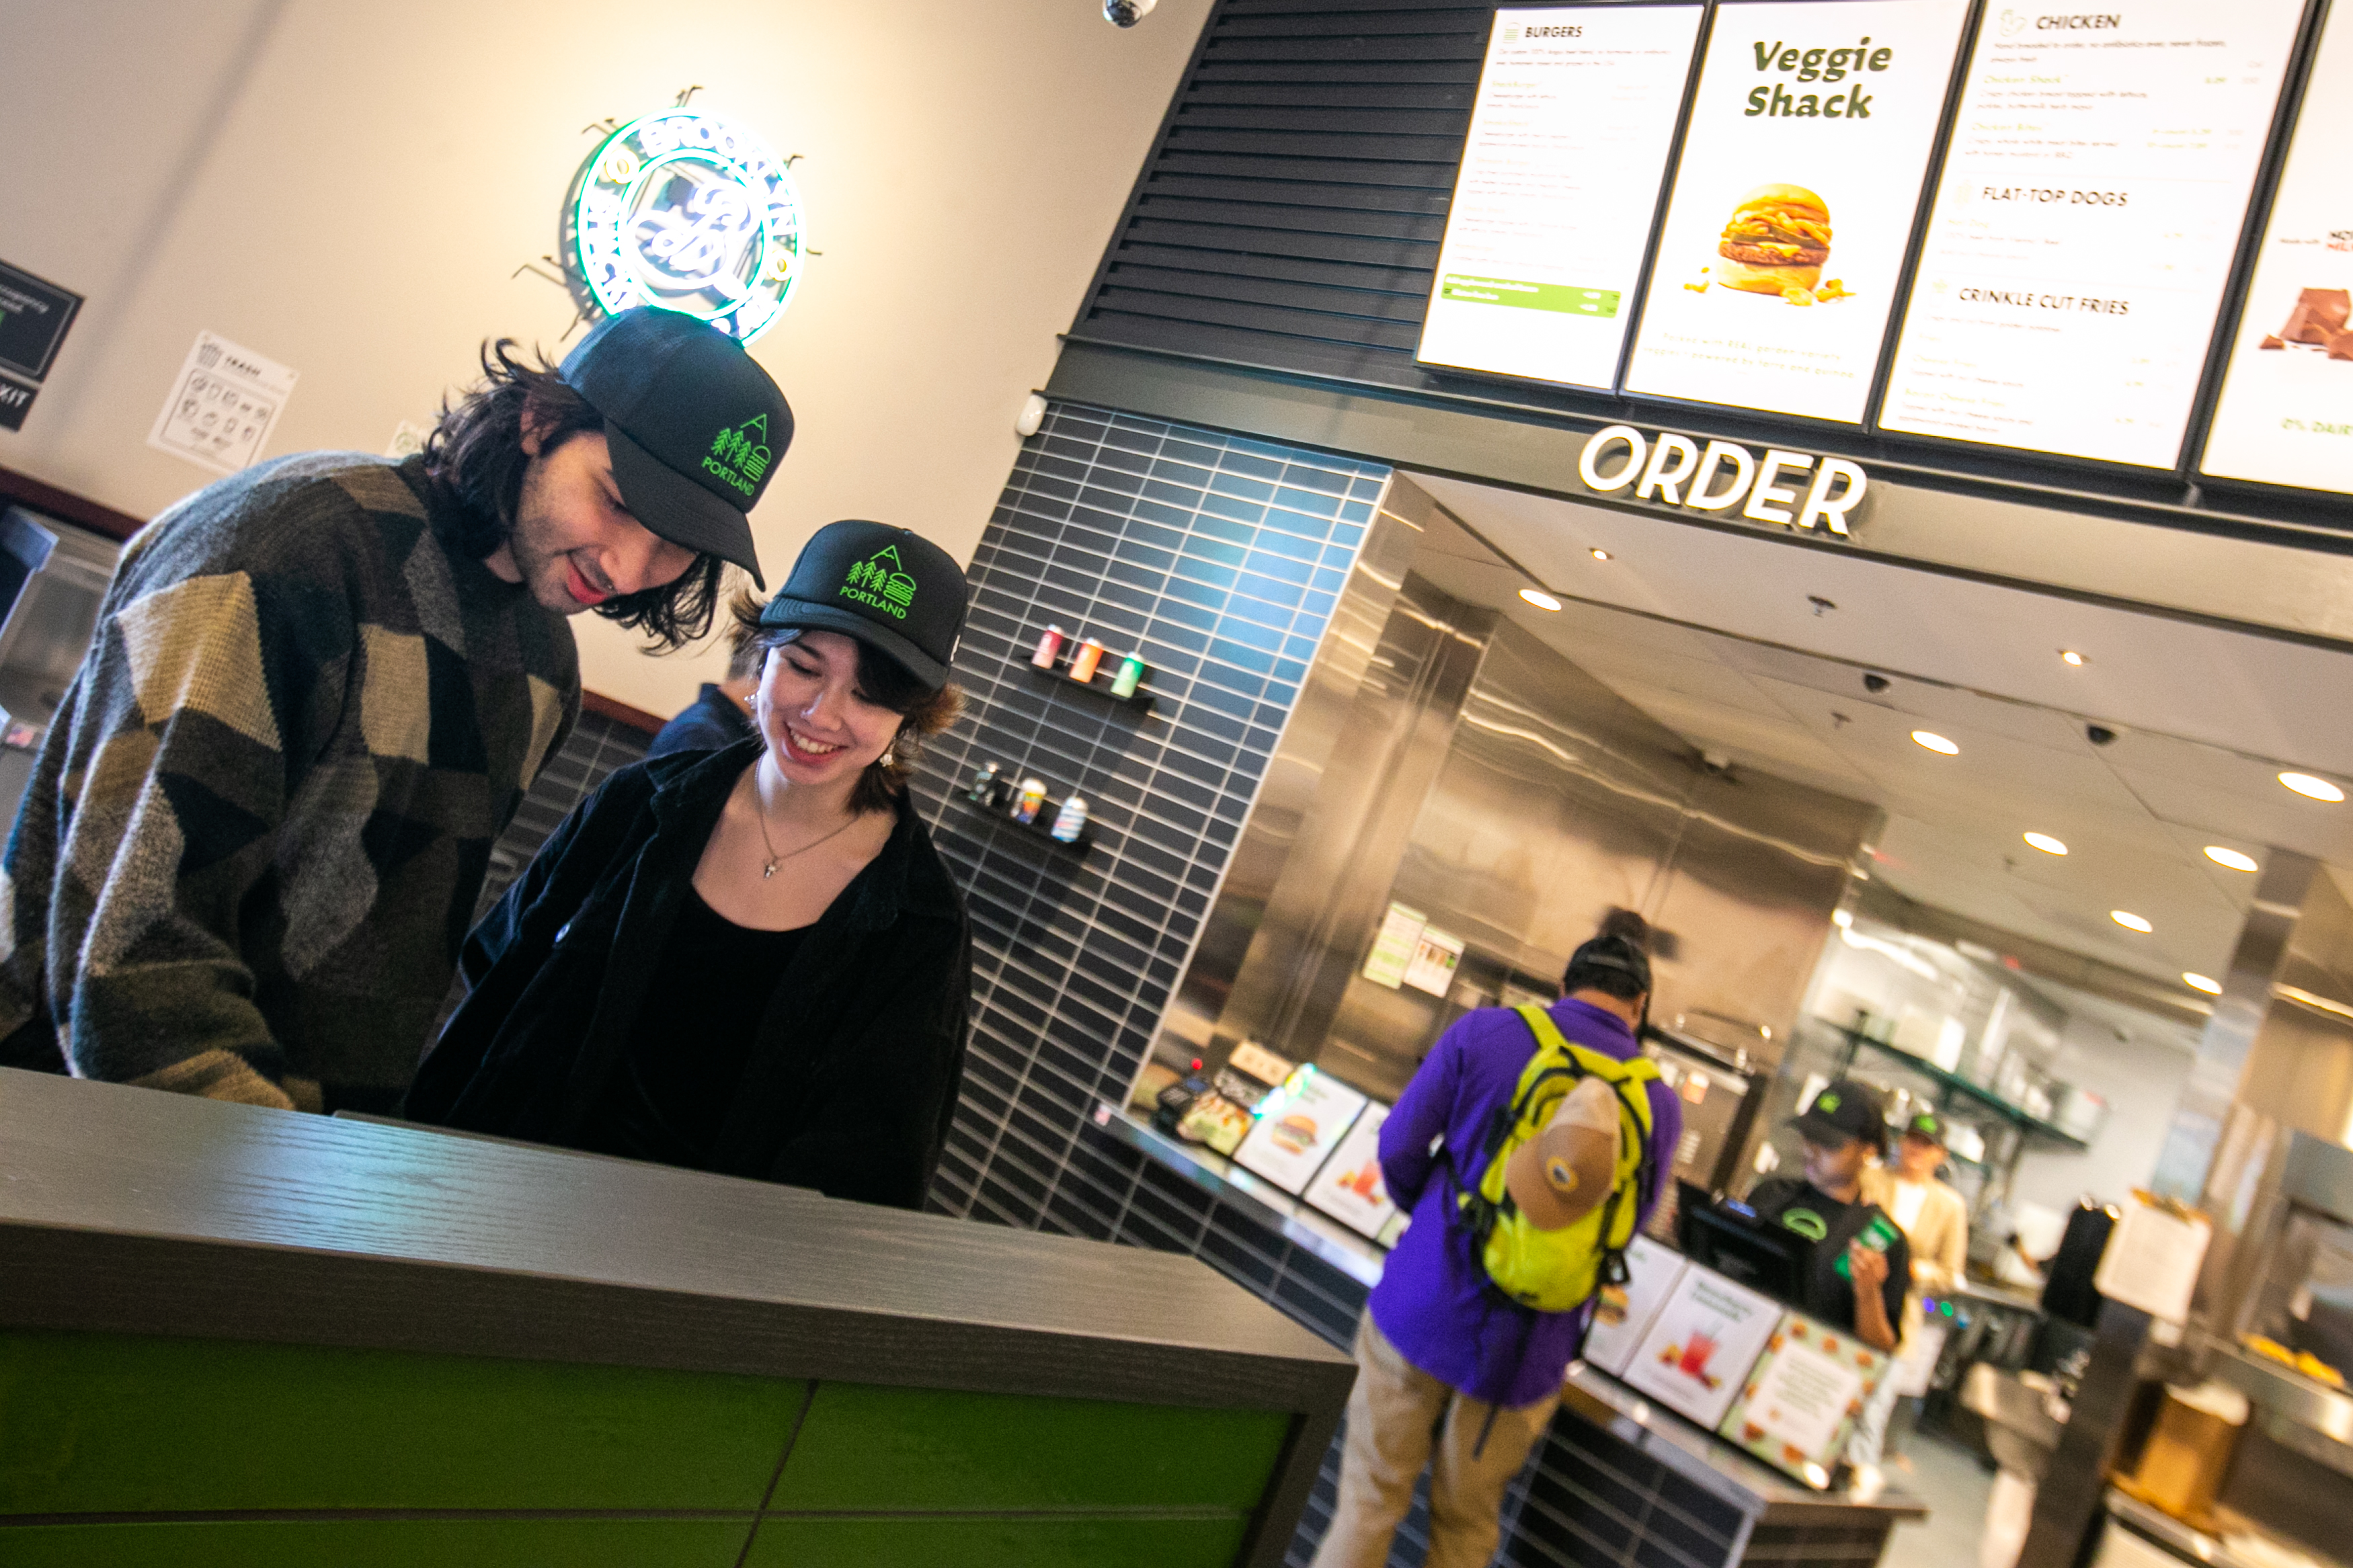 Shake Shack's latest Oregon location opens this month at this Bridgeport  Village mall 